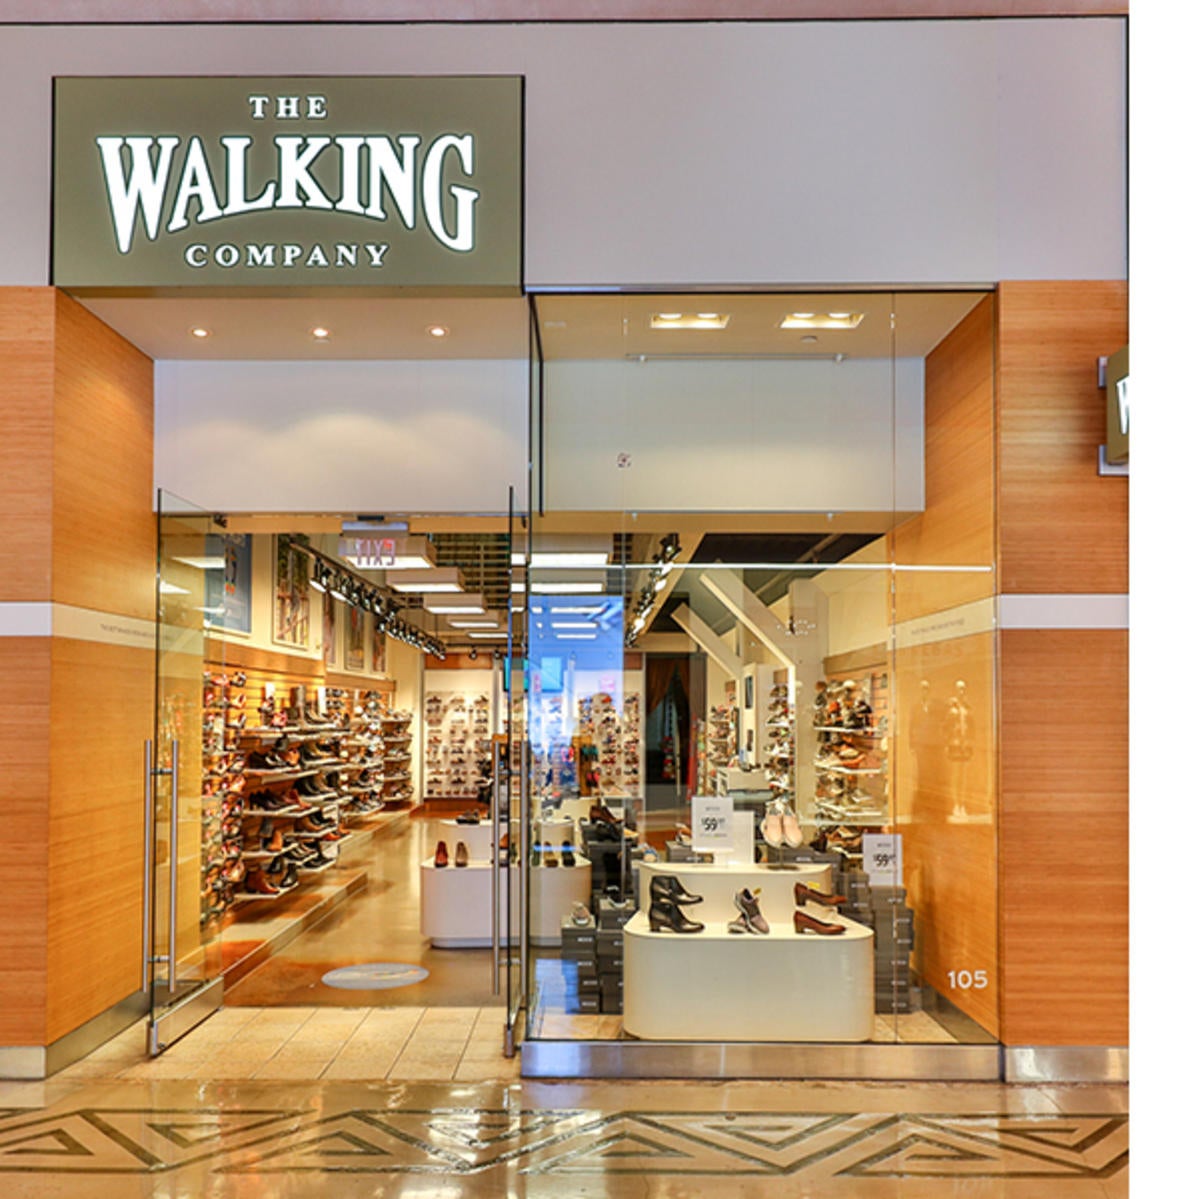 Walking Company, The | Miracle Mile 